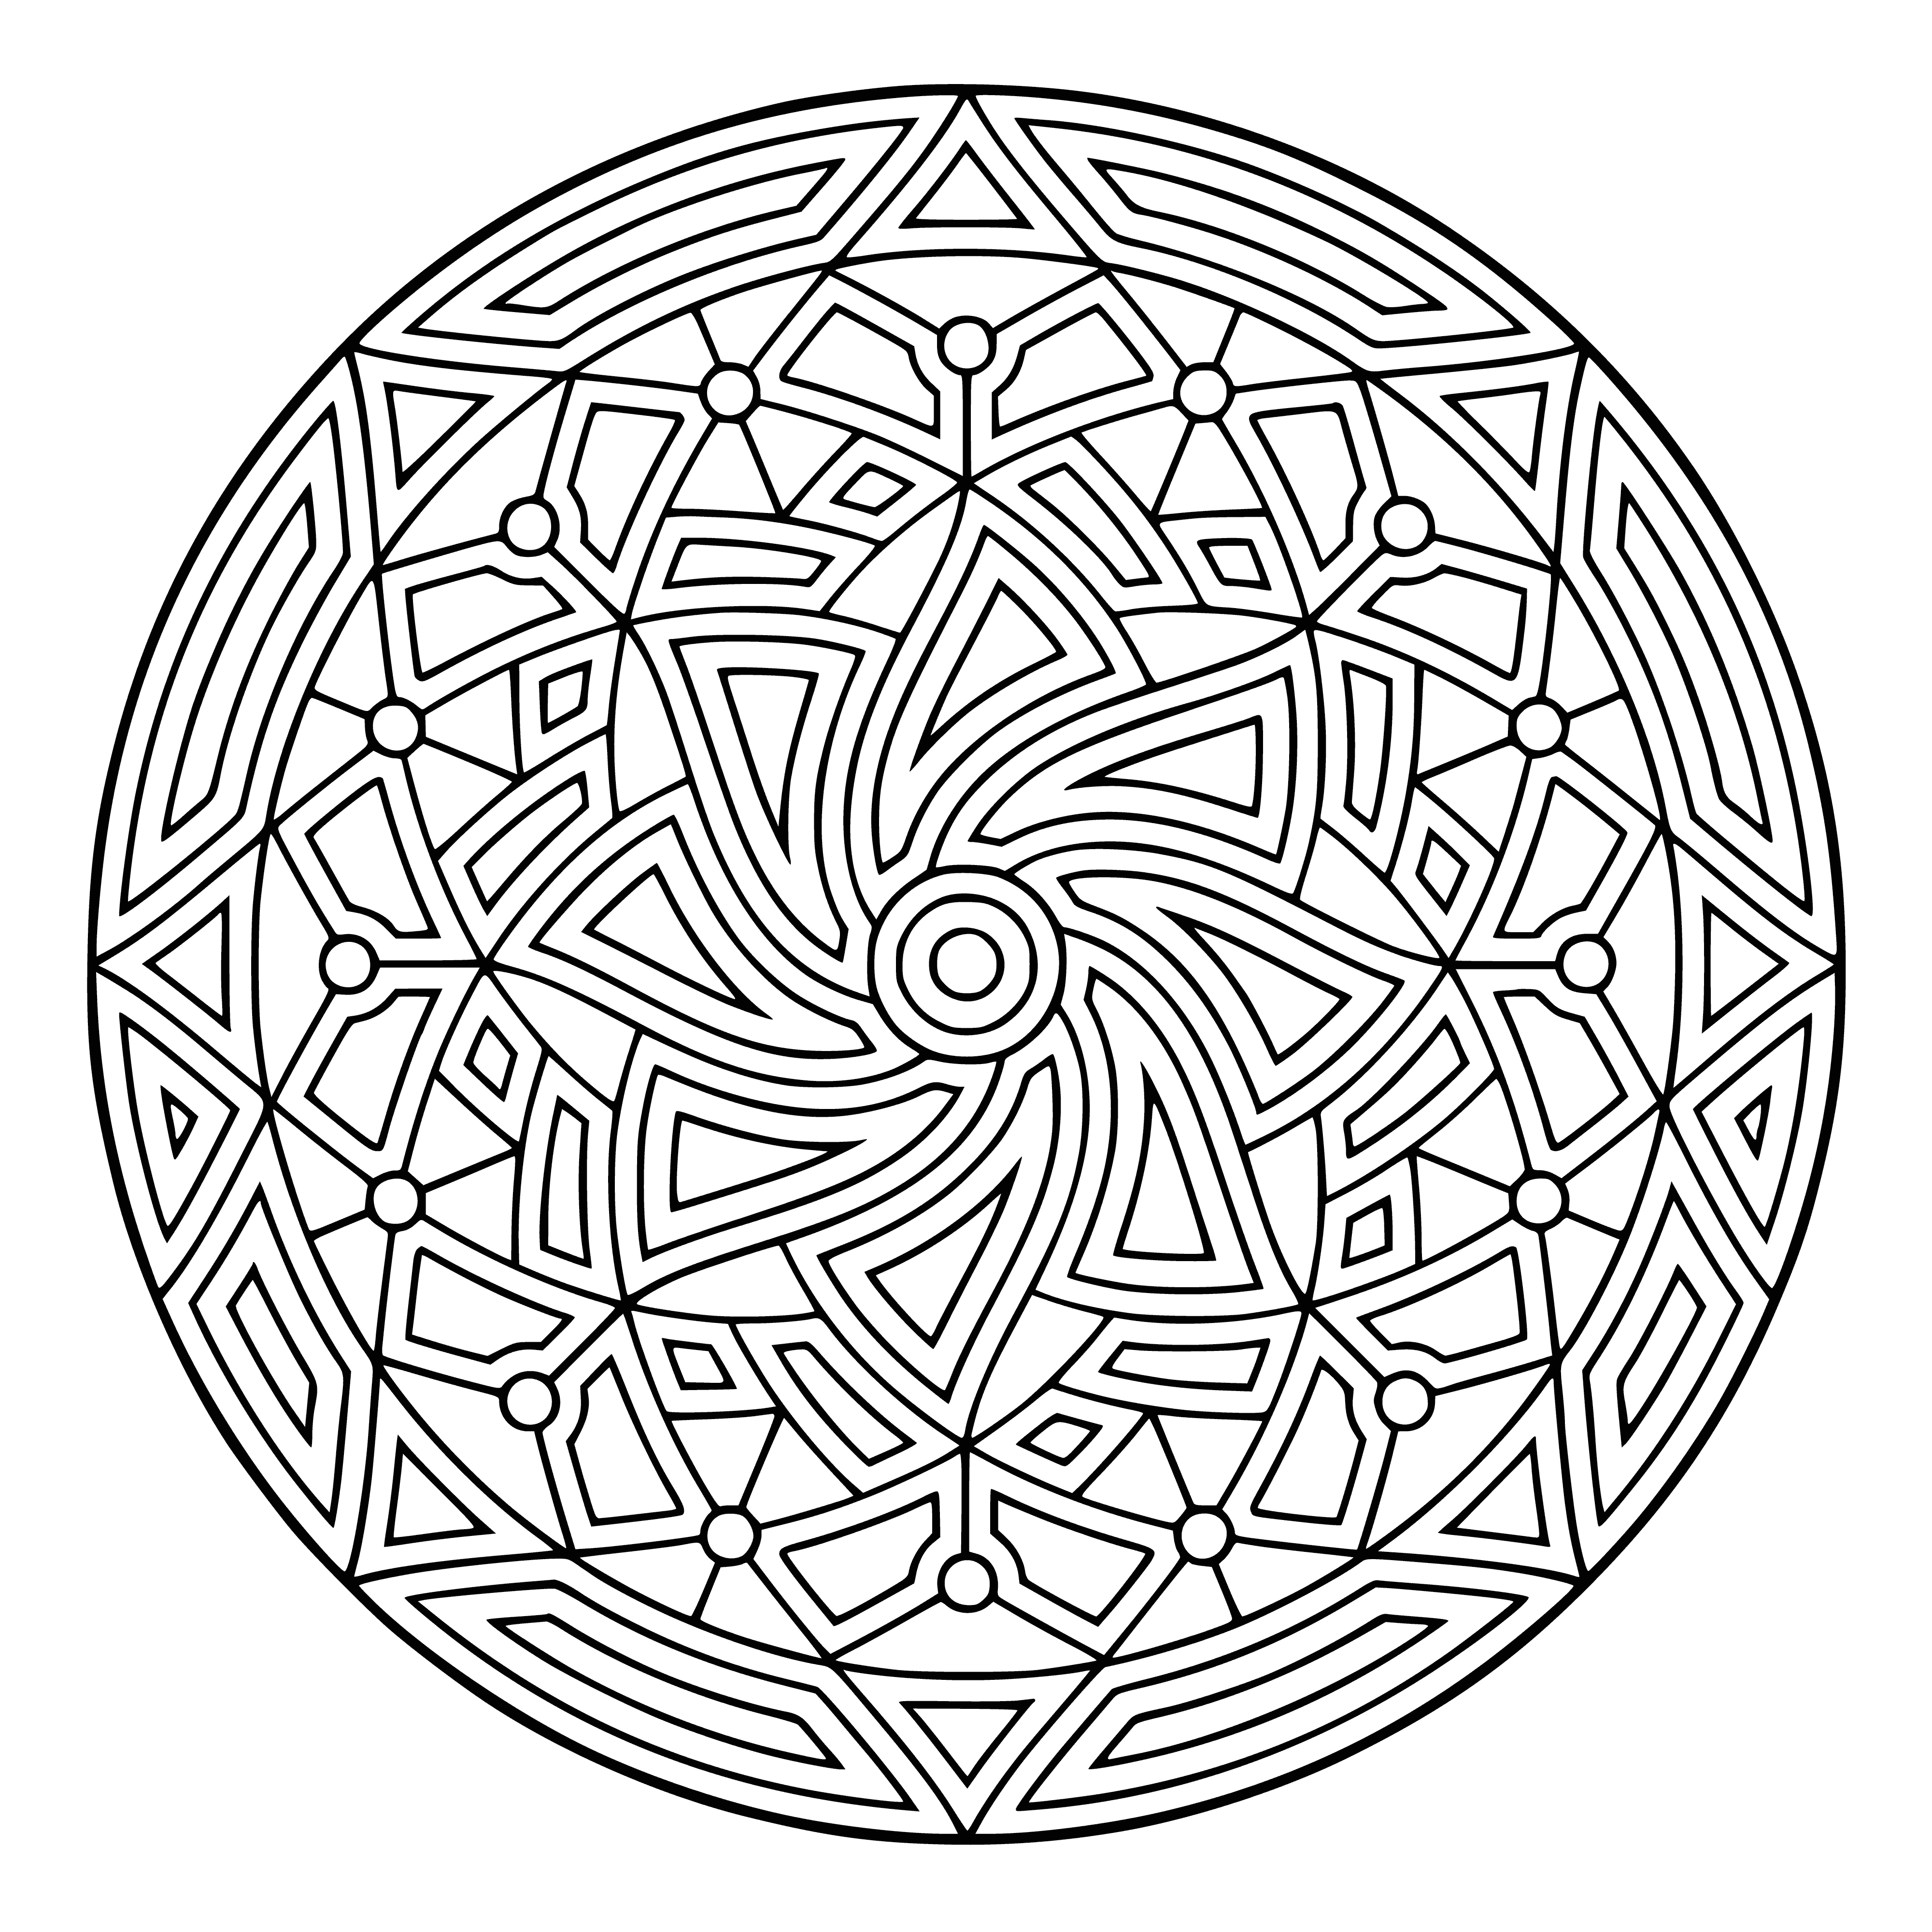 coloring page: Intricately patterned mandala coloring page used for meditation and contemplation to activate the body's energy centers.